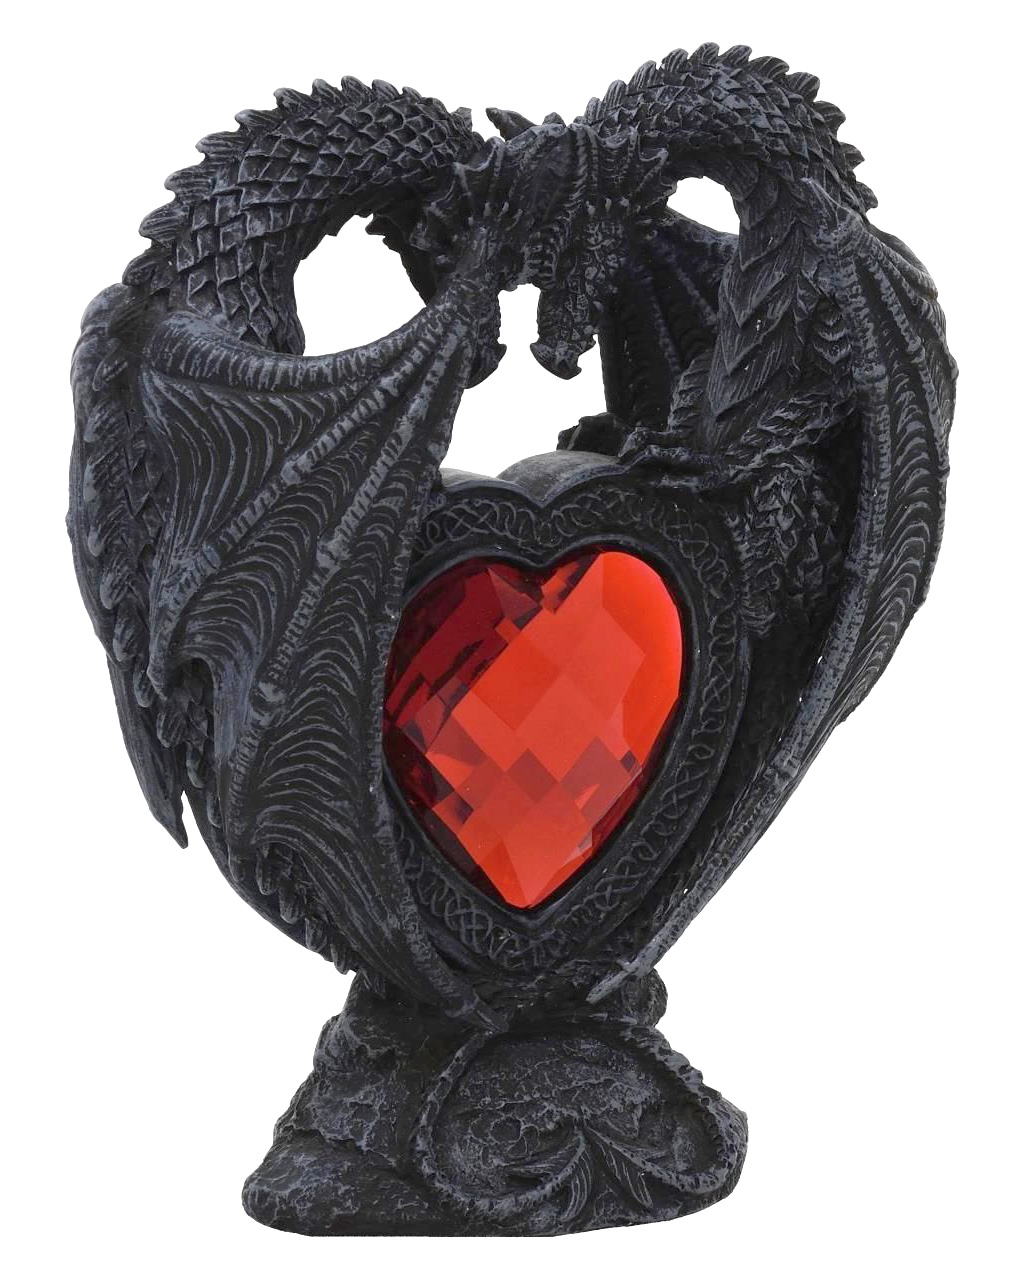 HAPPY CUTE DRAGON STATUES ORNAMENTS FIGURINES COUPLES READING RED HEART FLOWERS 